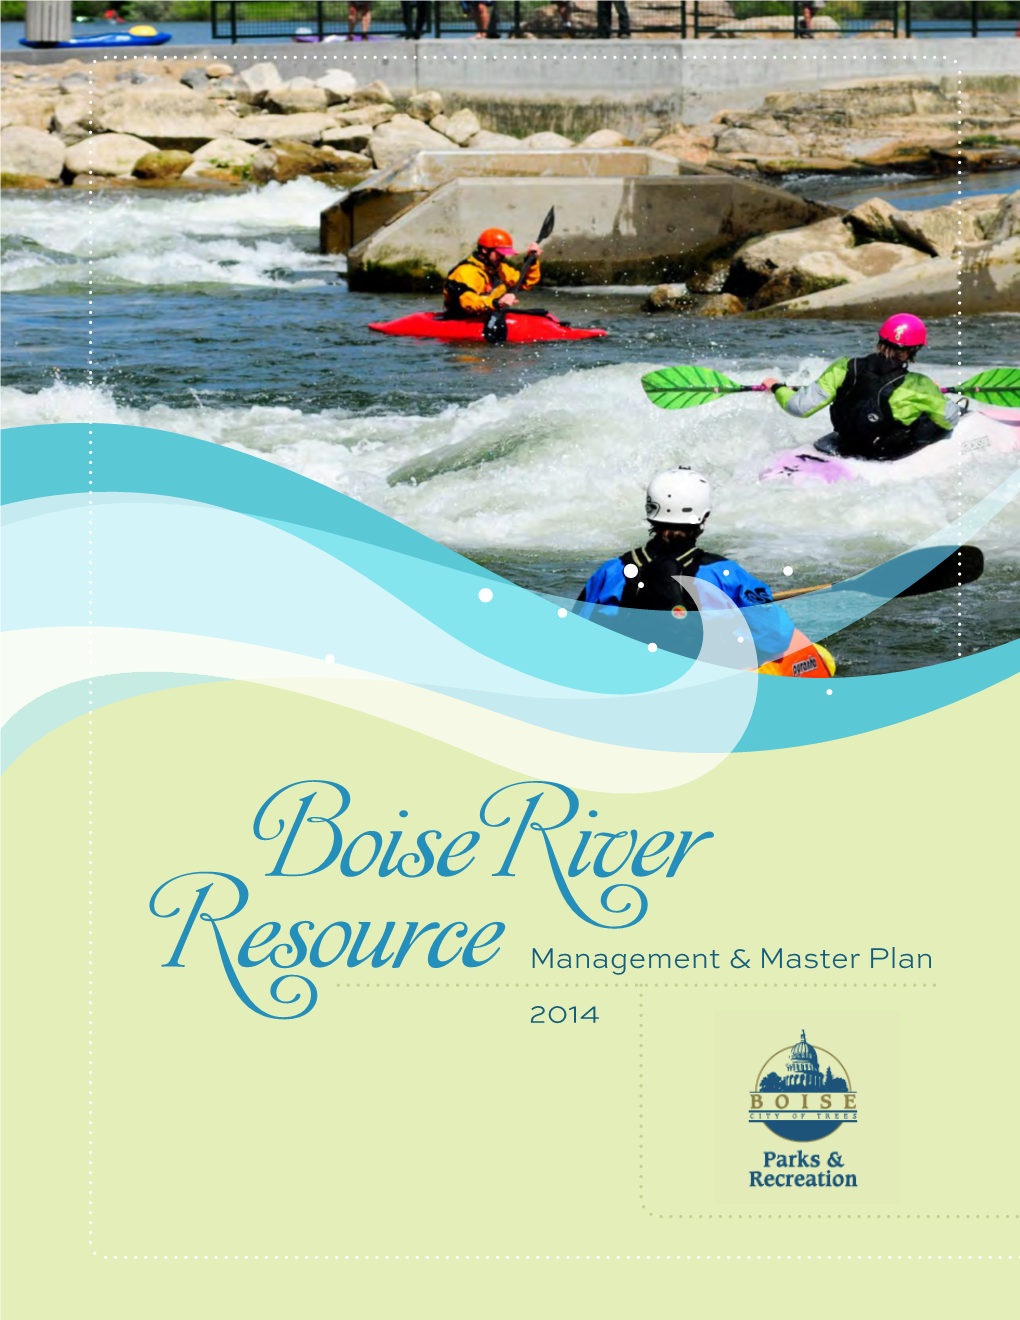 Boise River Resource Management and Master Plan Was Adopted by the City of Boise in 1999